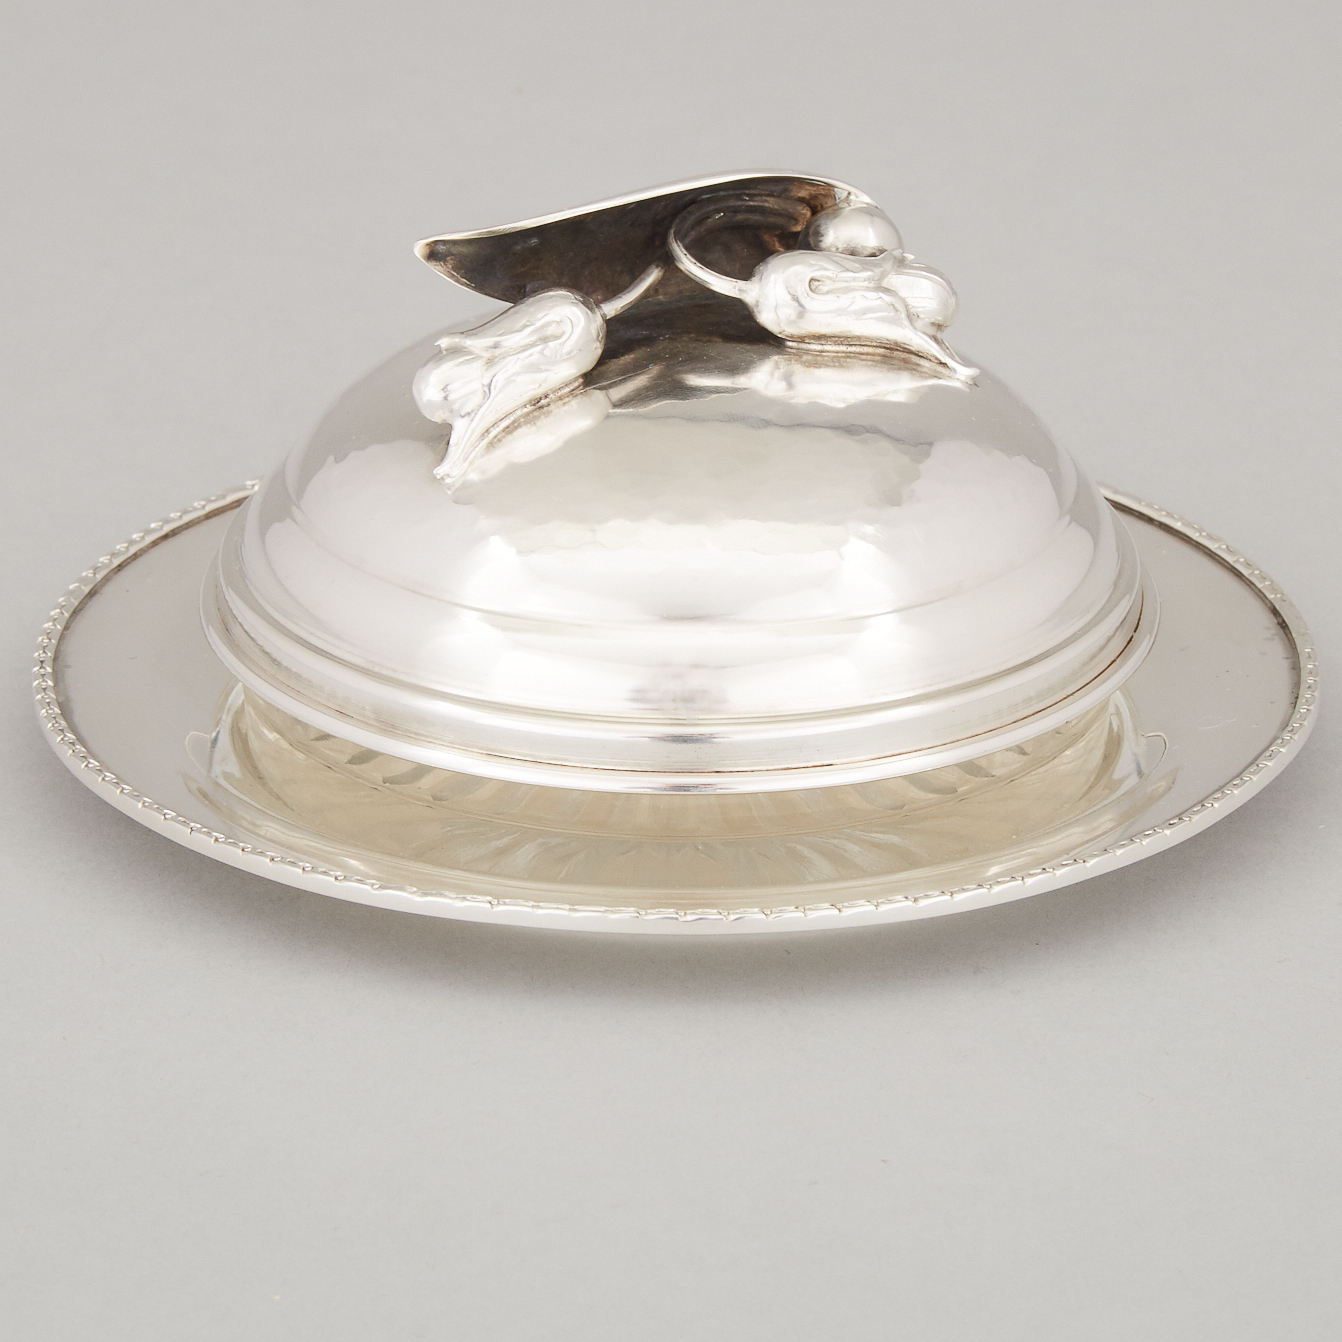 Canadian Silver Butter Dish, Carl Poul Petersen, Montreal, Que., mid-20th century